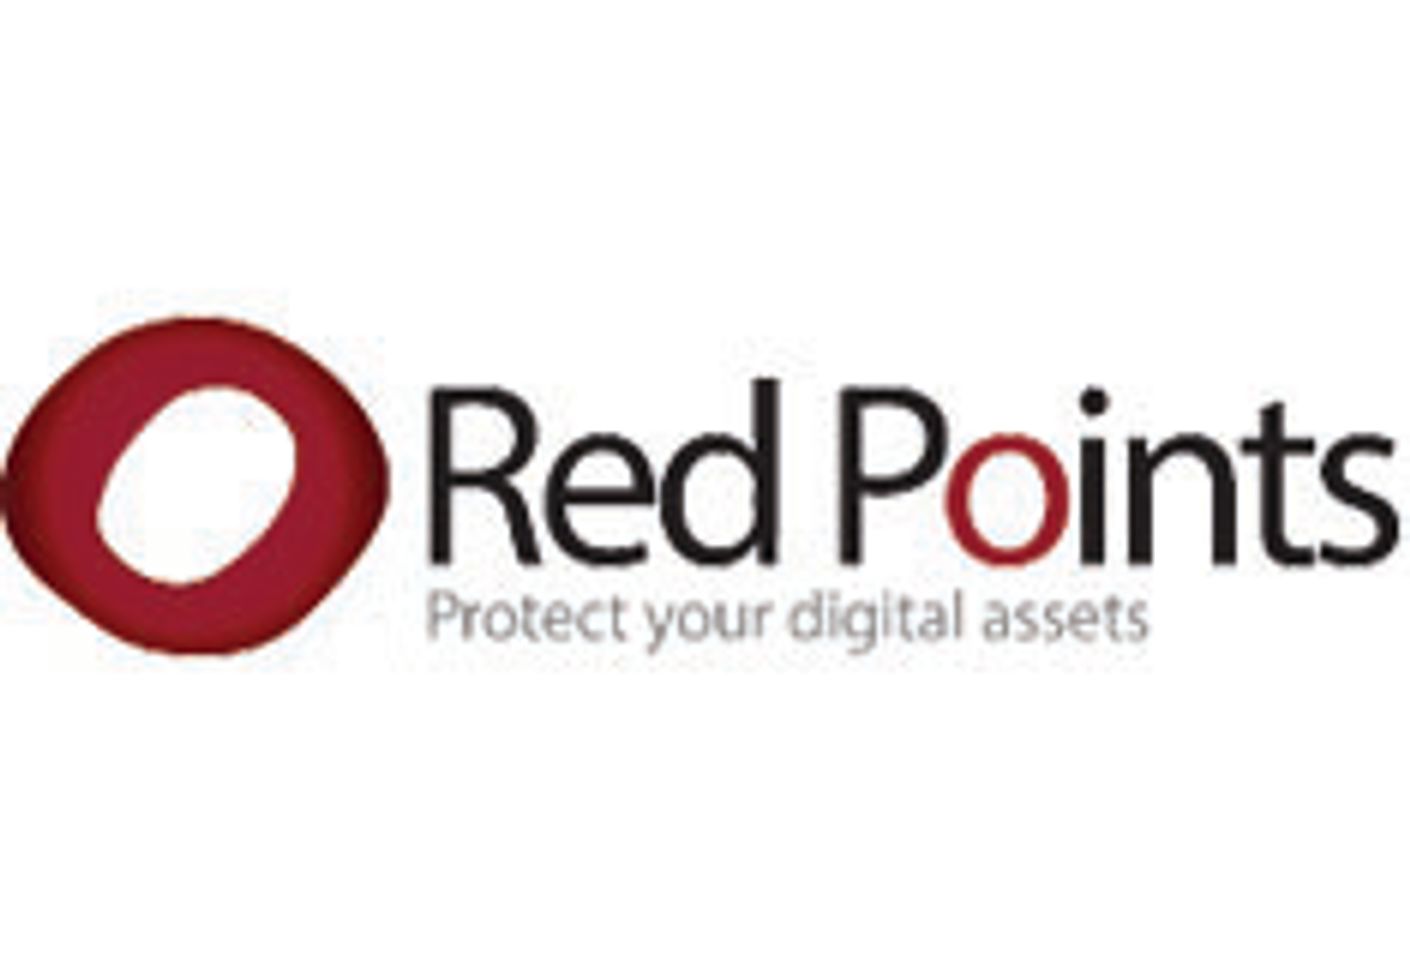 Tech Company Red Points Ready To Work With Clients In Adult